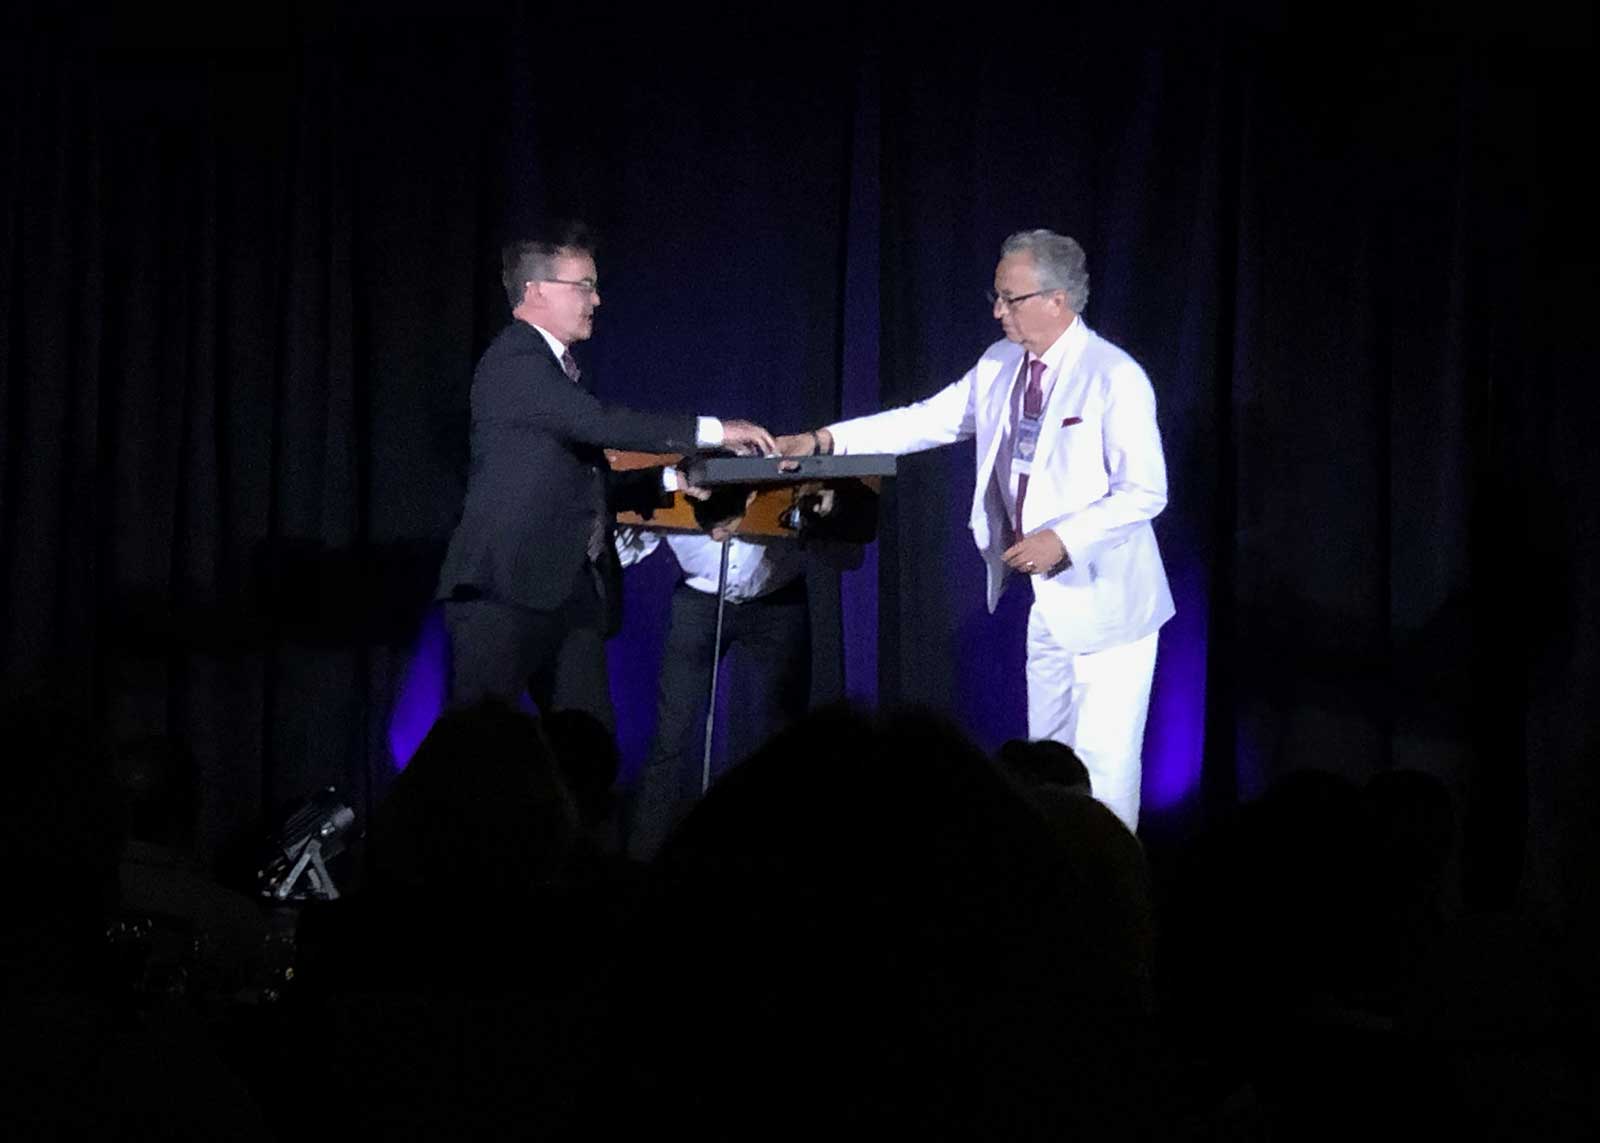 David Sandy and Lance Rich perform The Great Leon's Pillory Escape Illusion at the Magic Collectors Expo 2021